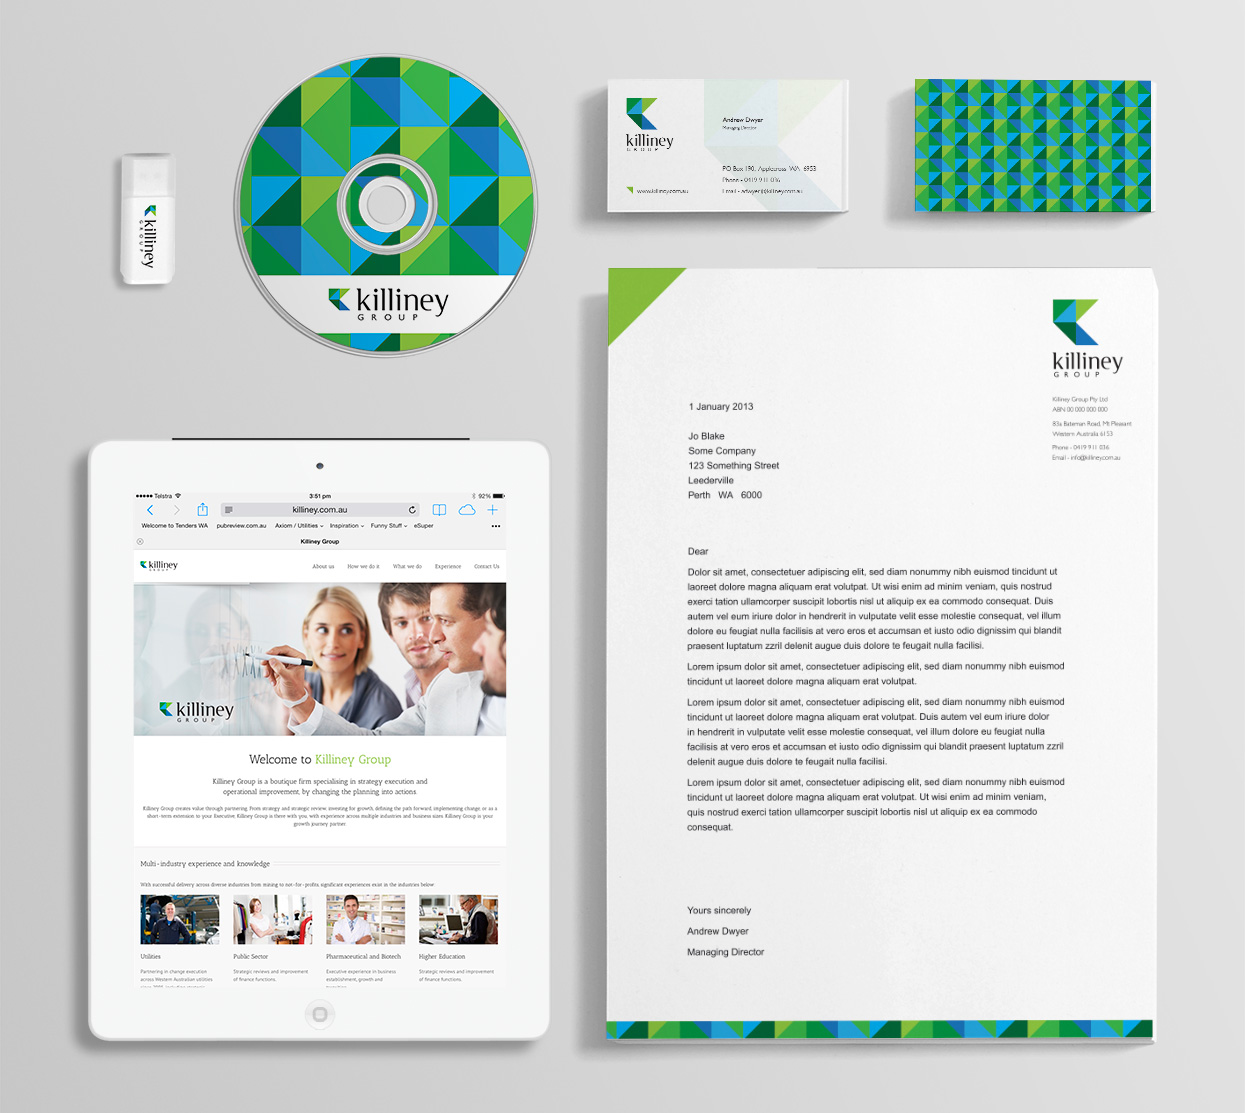 Killiney Group Corporate Collateral